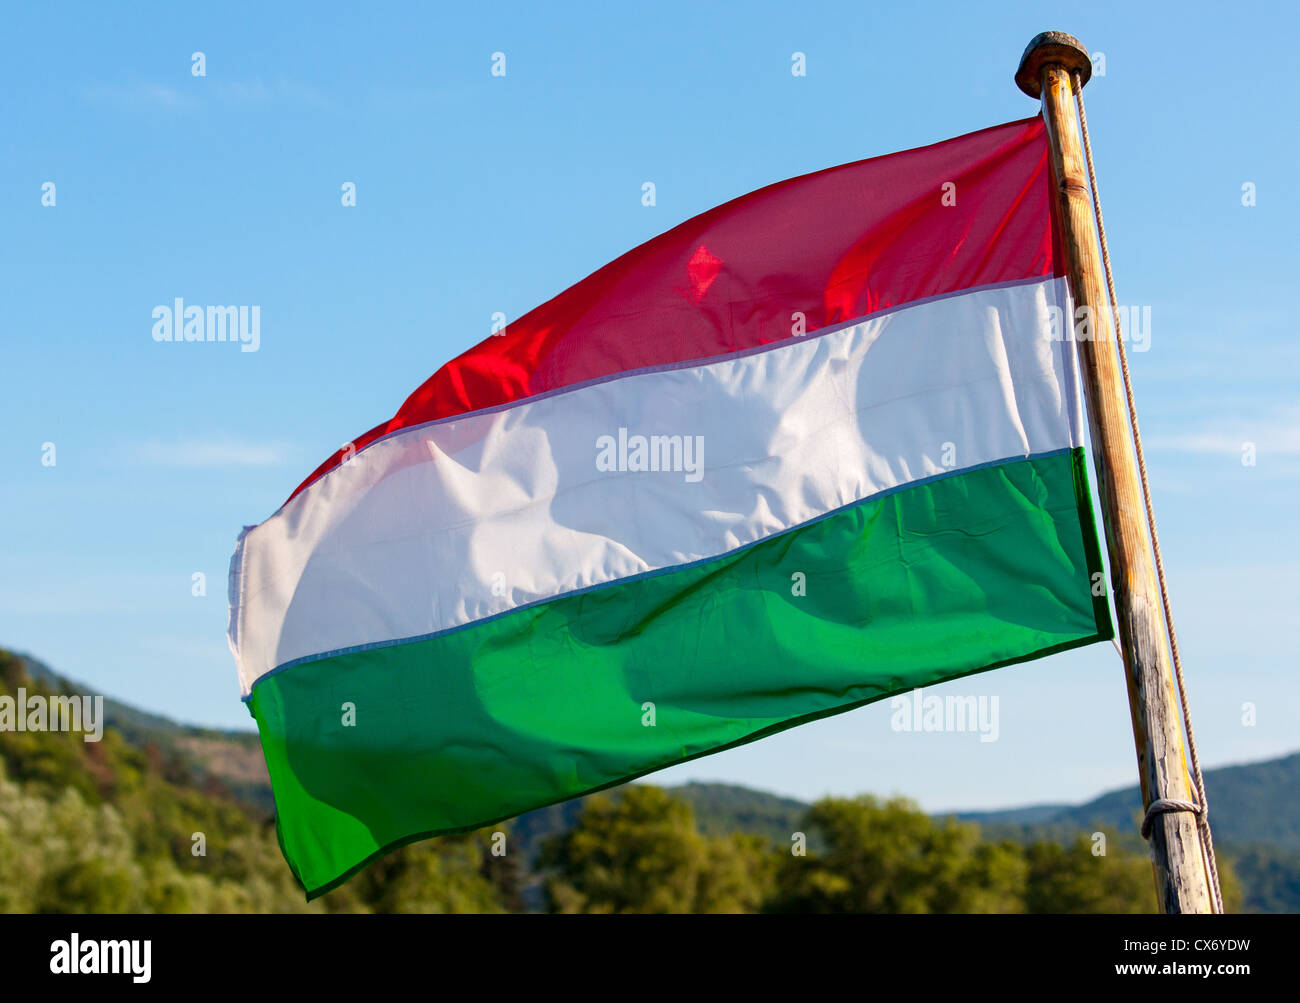 Flag of Hungary is waving in the wind. Stock Photo